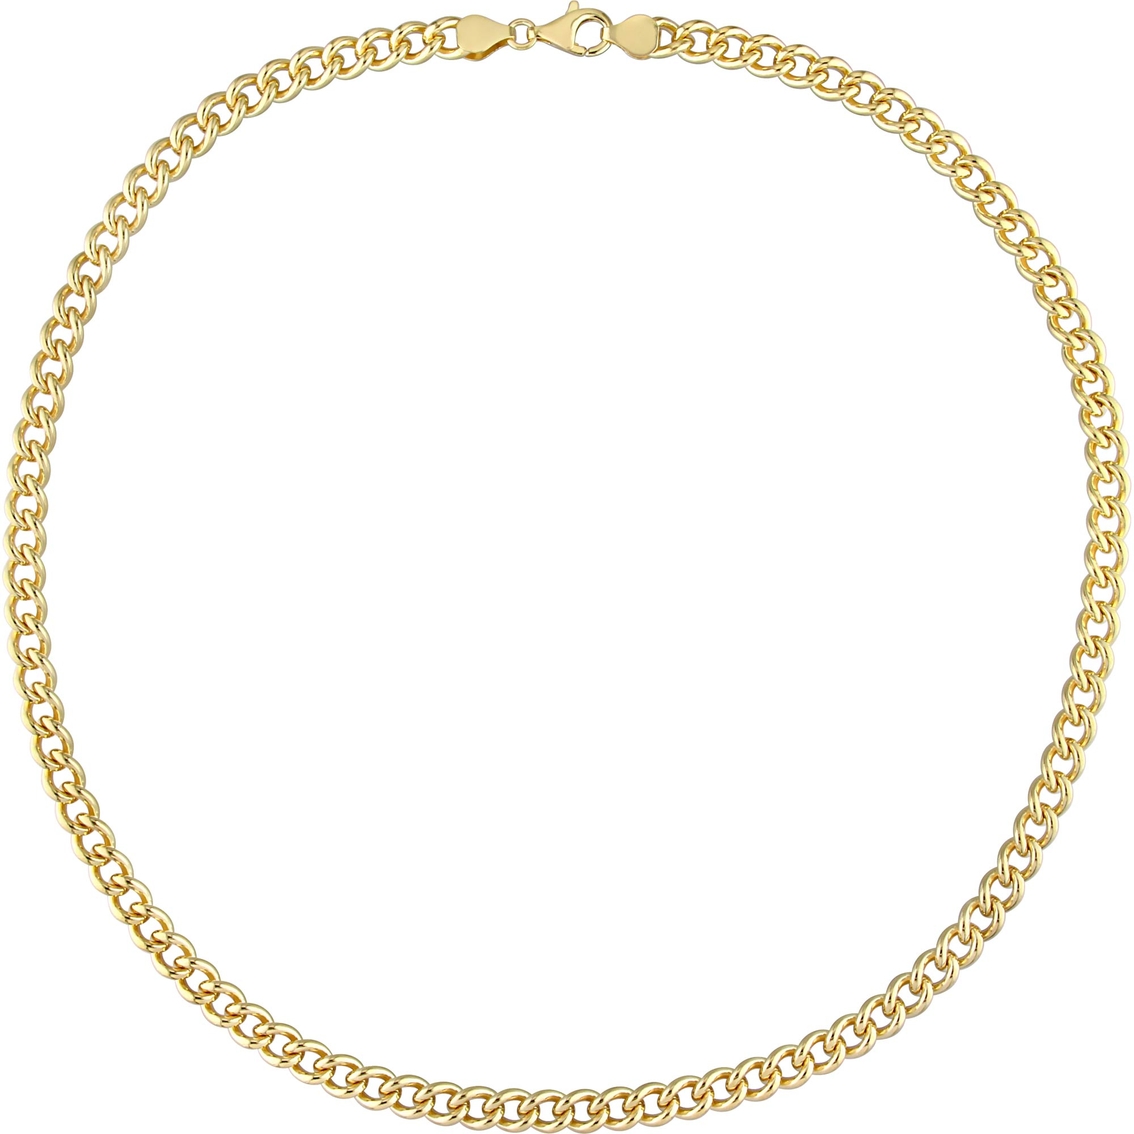 Sofia B. 18K Gold Plated Sterling Silver 6.5mm Curb Link Chain Necklace - Image 3 of 3